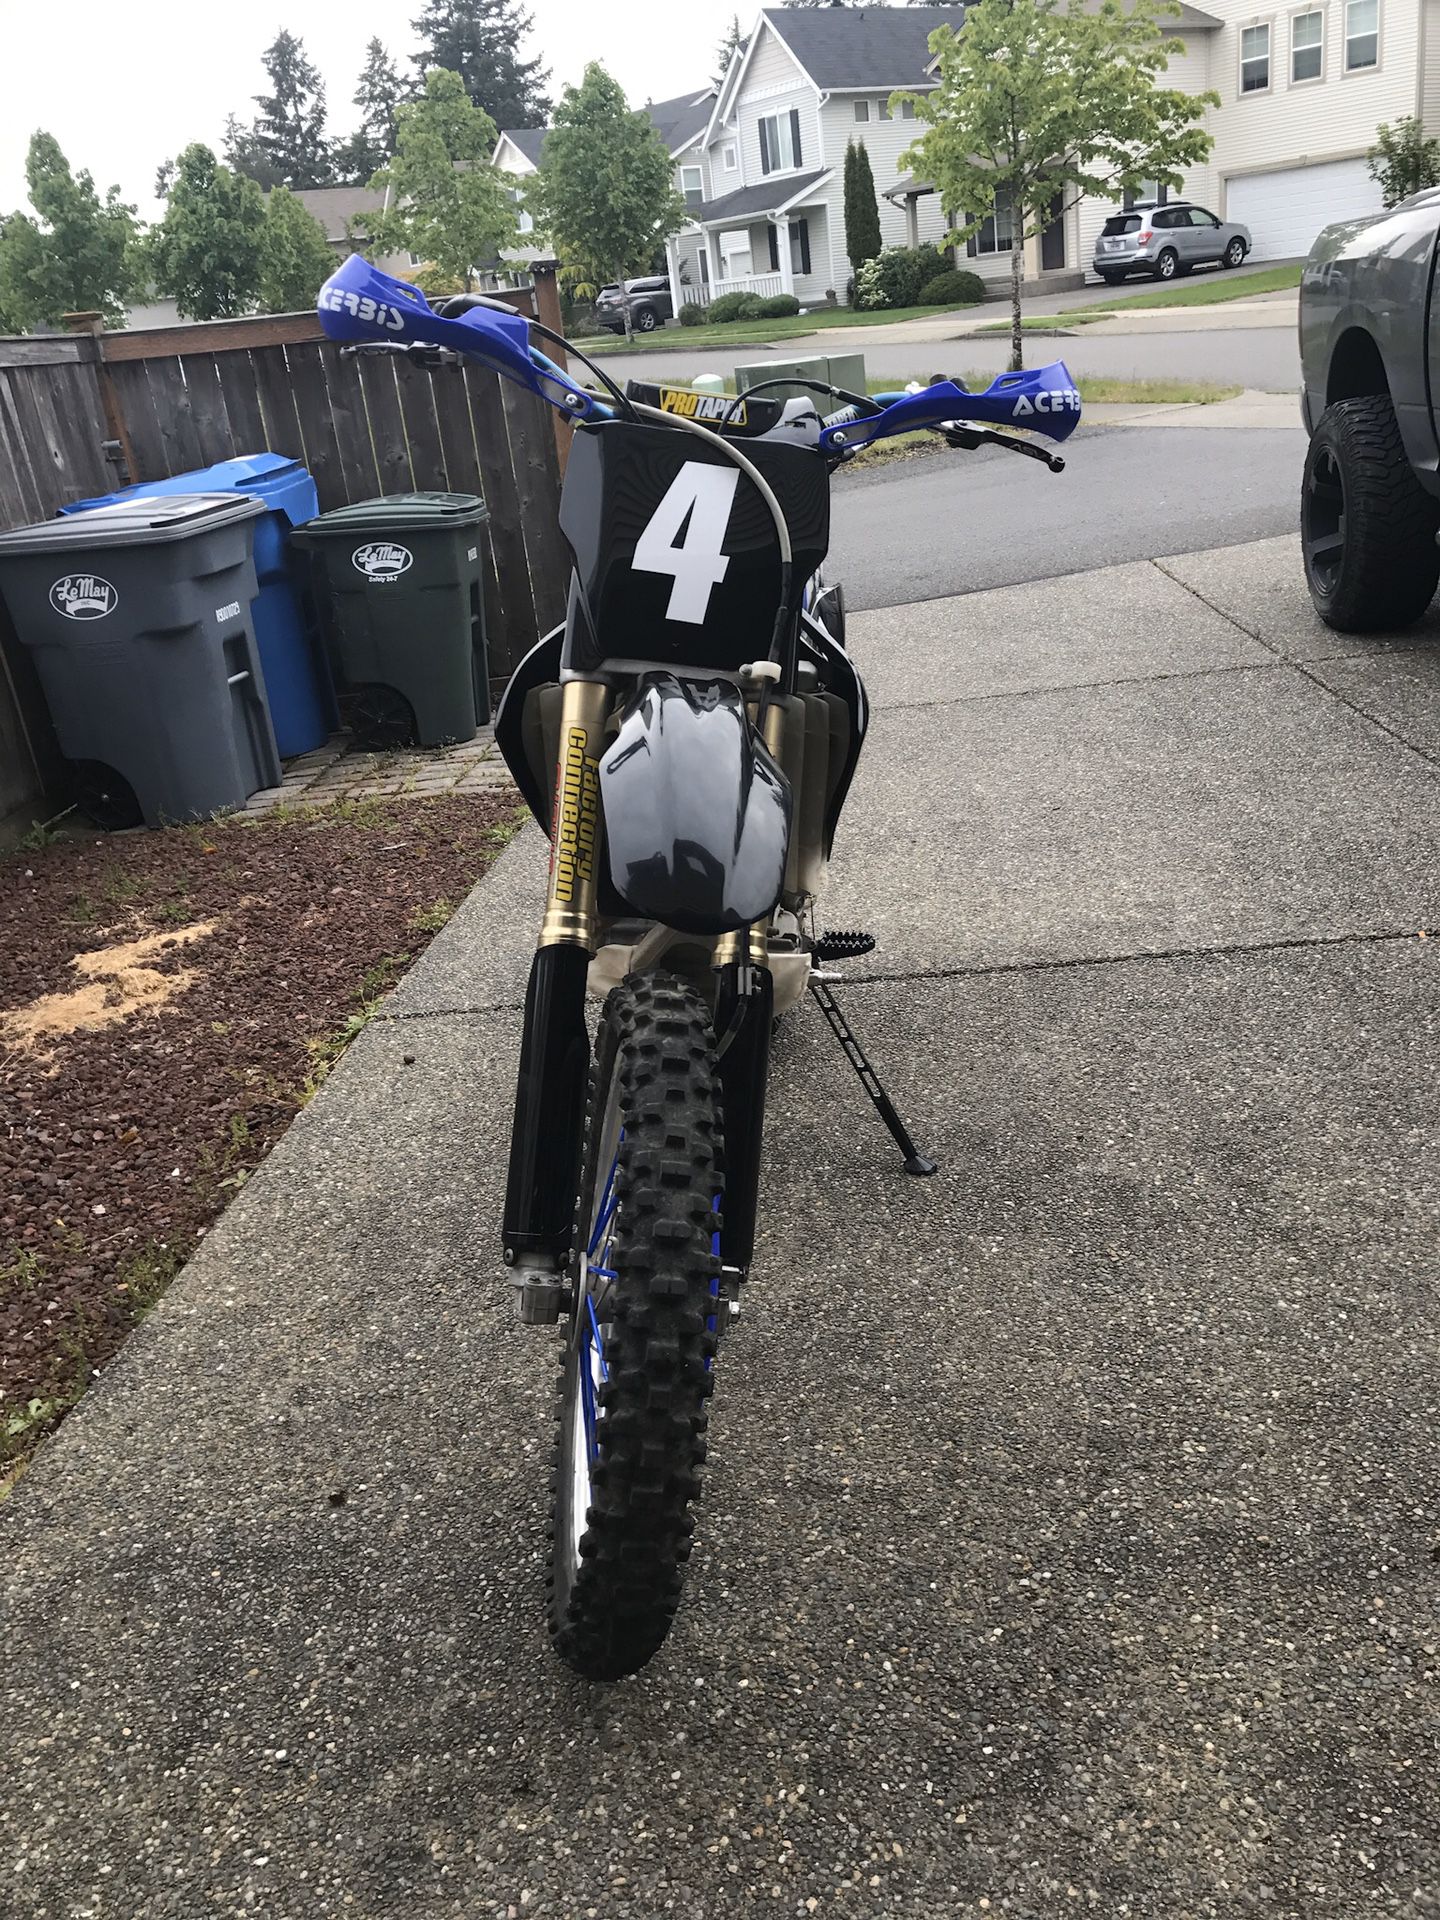 2006 Crf450r with title